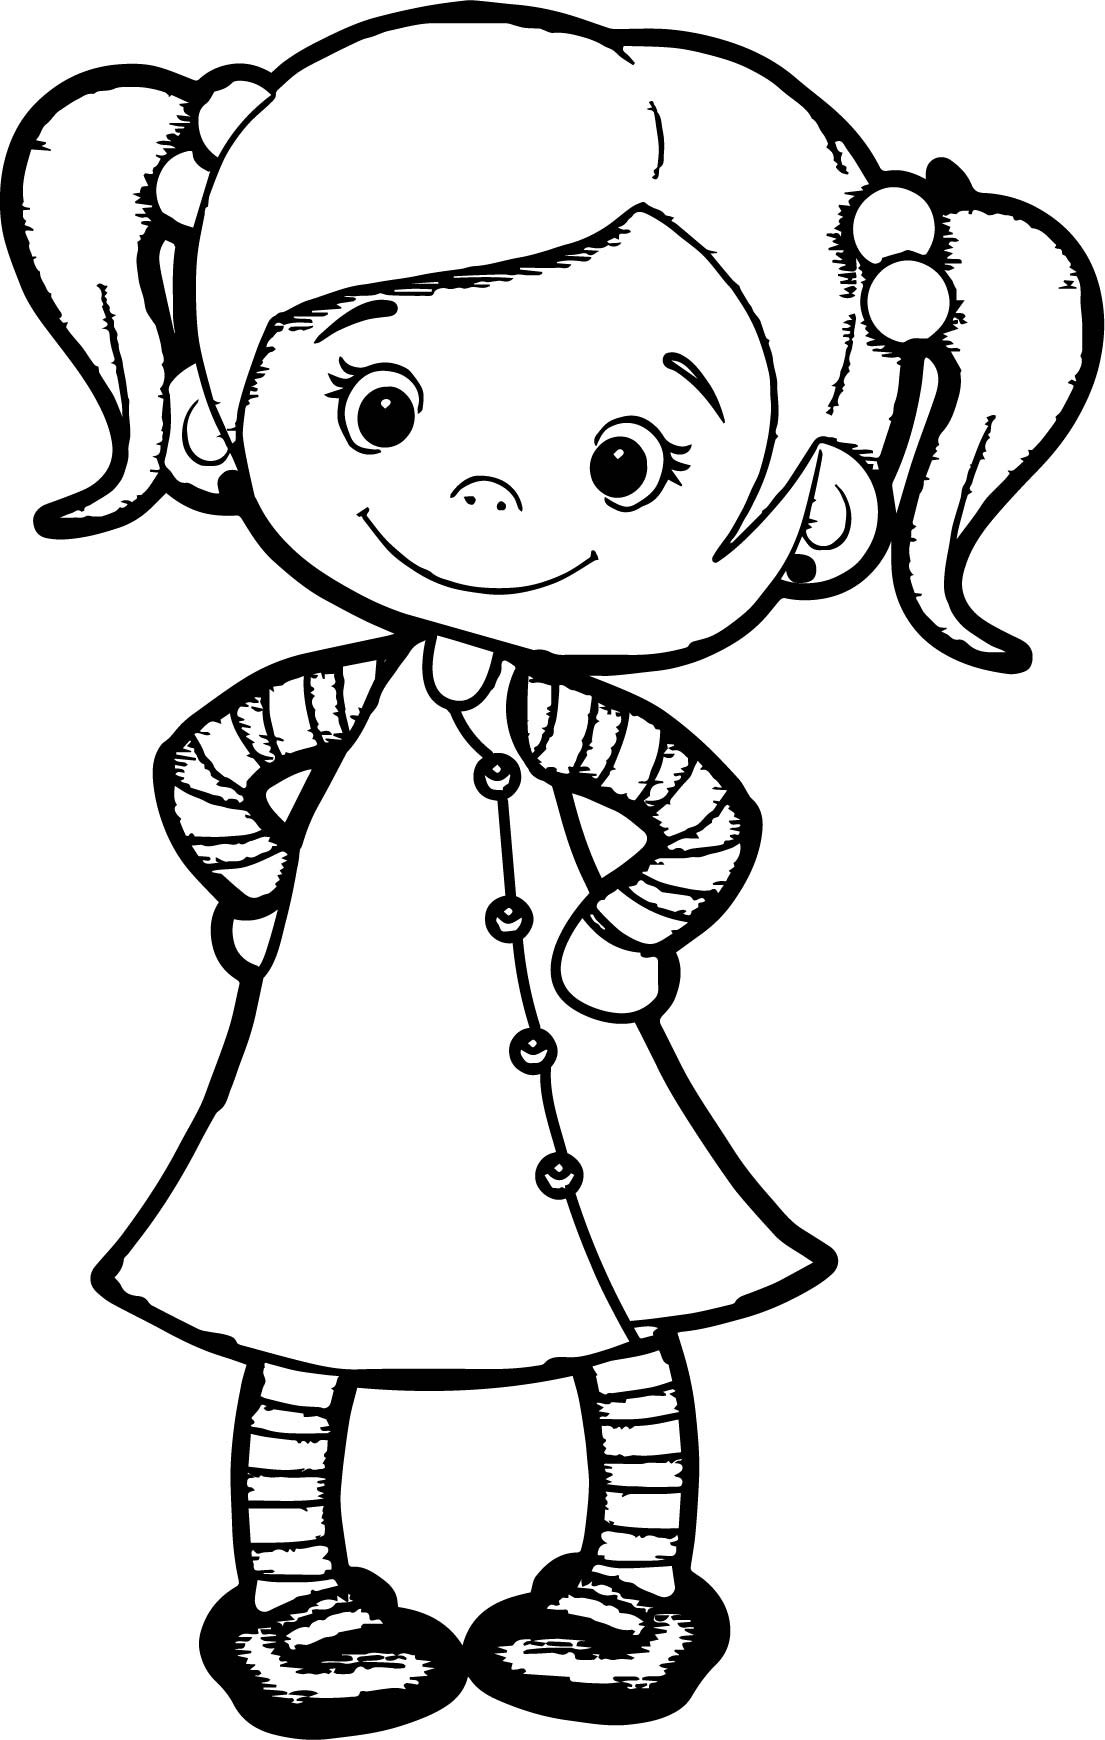 Leprechaun Face Coloring Pages at GetDrawings | Free download